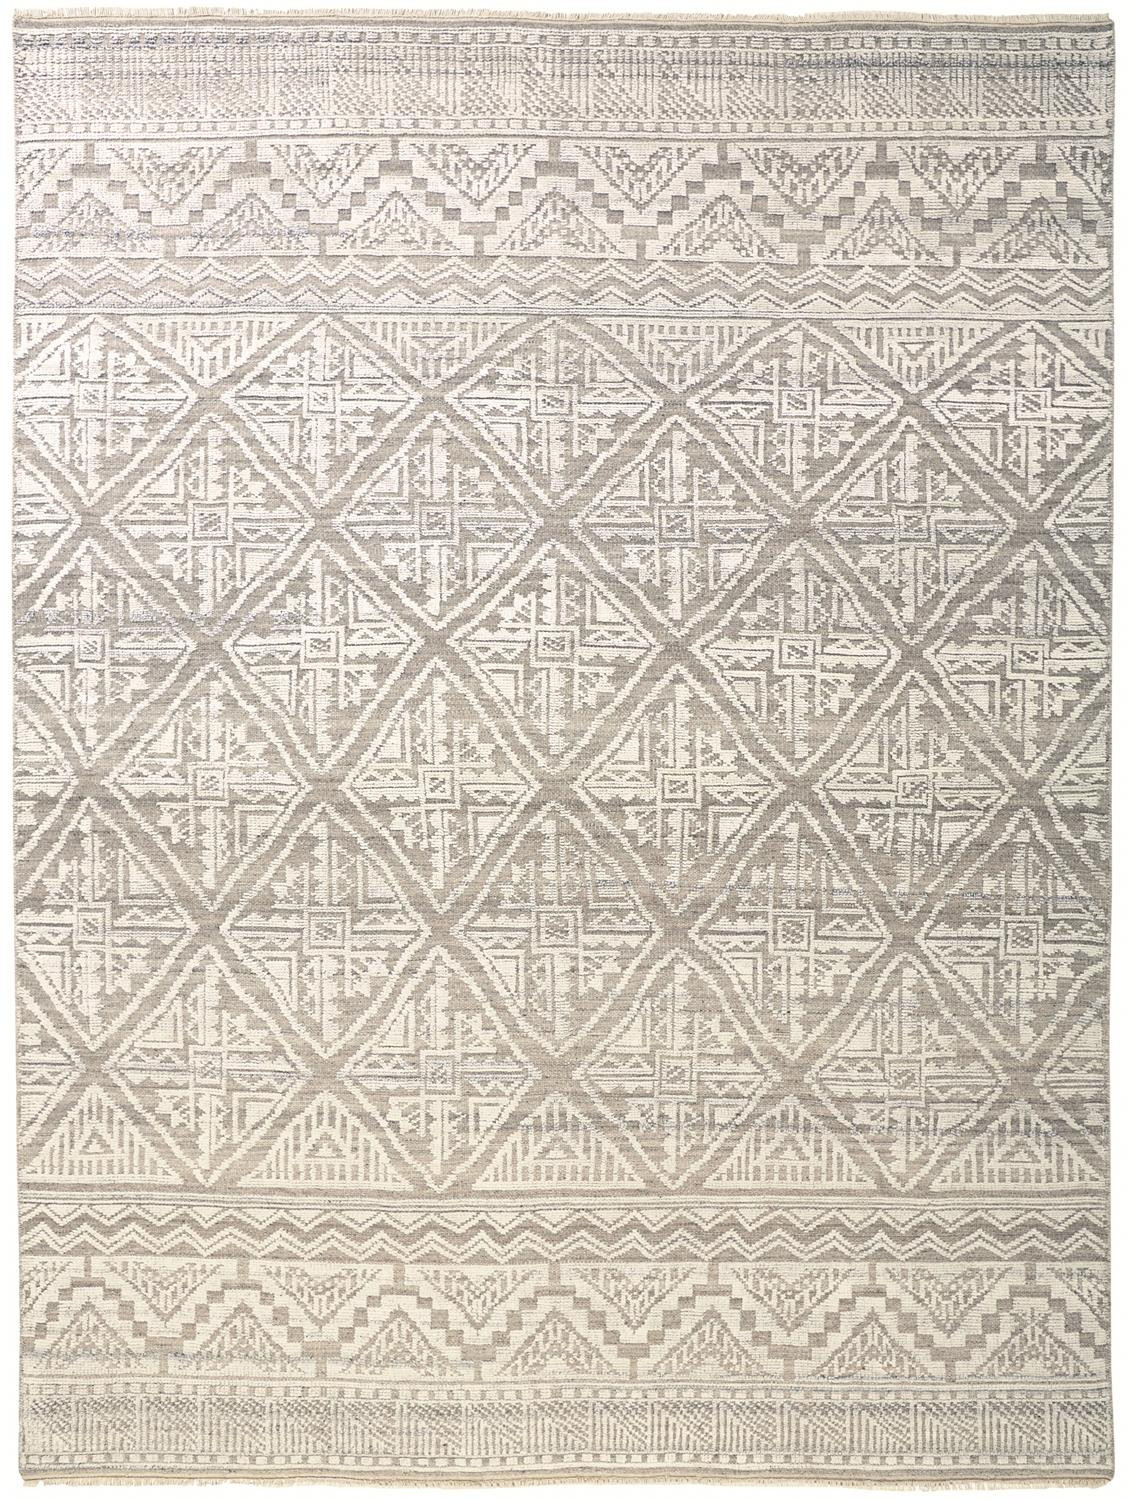 12' X 15' Ivory Tan And Gray Geometric Hand Knotted Area Rug-512587-1